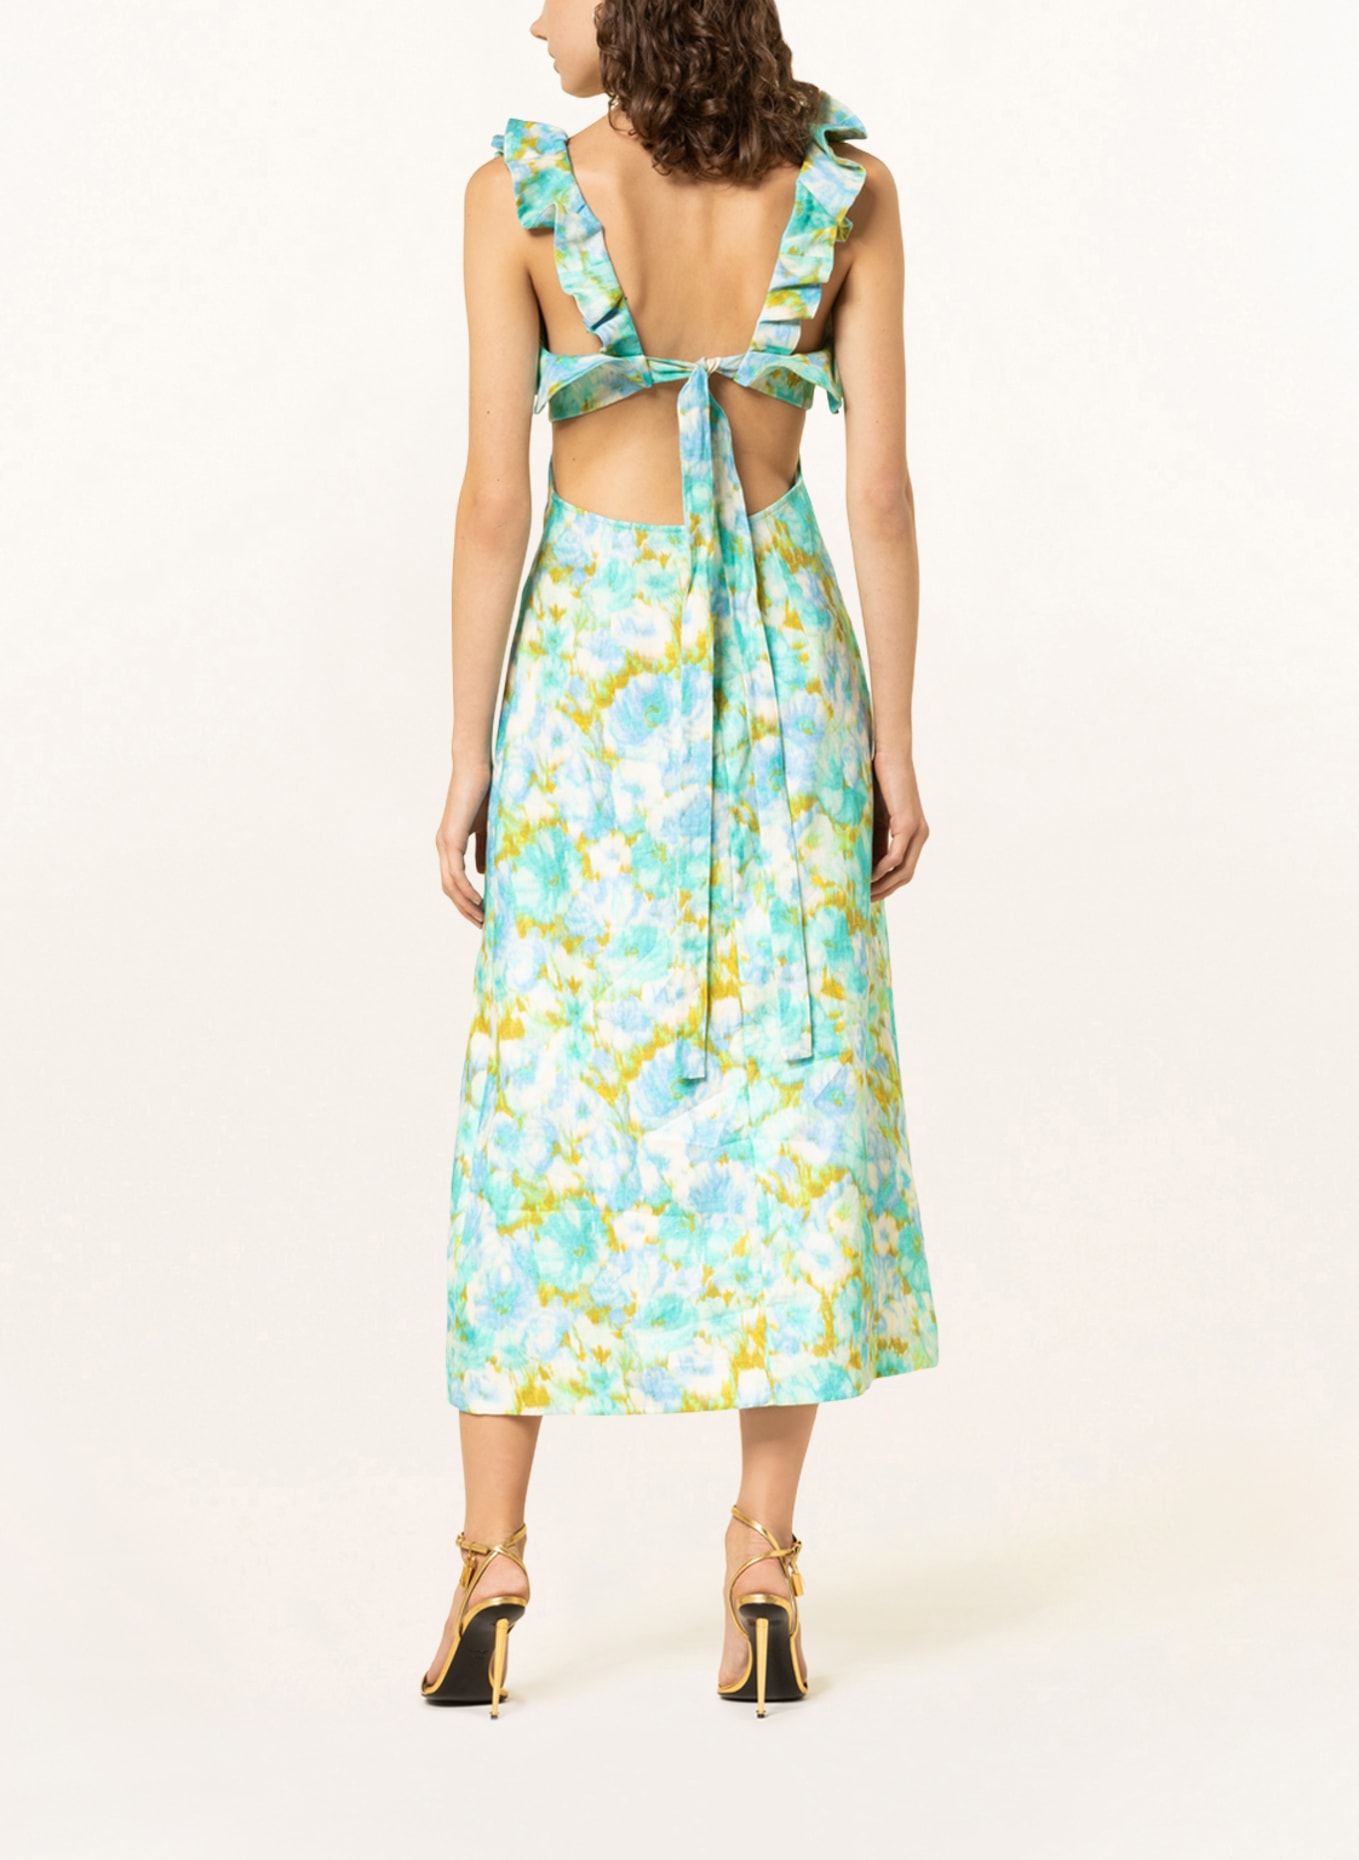 ZIMMERMANN Linen dress HIGH TIDE with frills, Color: NEON TURQUOISE/ LIGHT BLUE/ DARK YELLOW (Image 3)